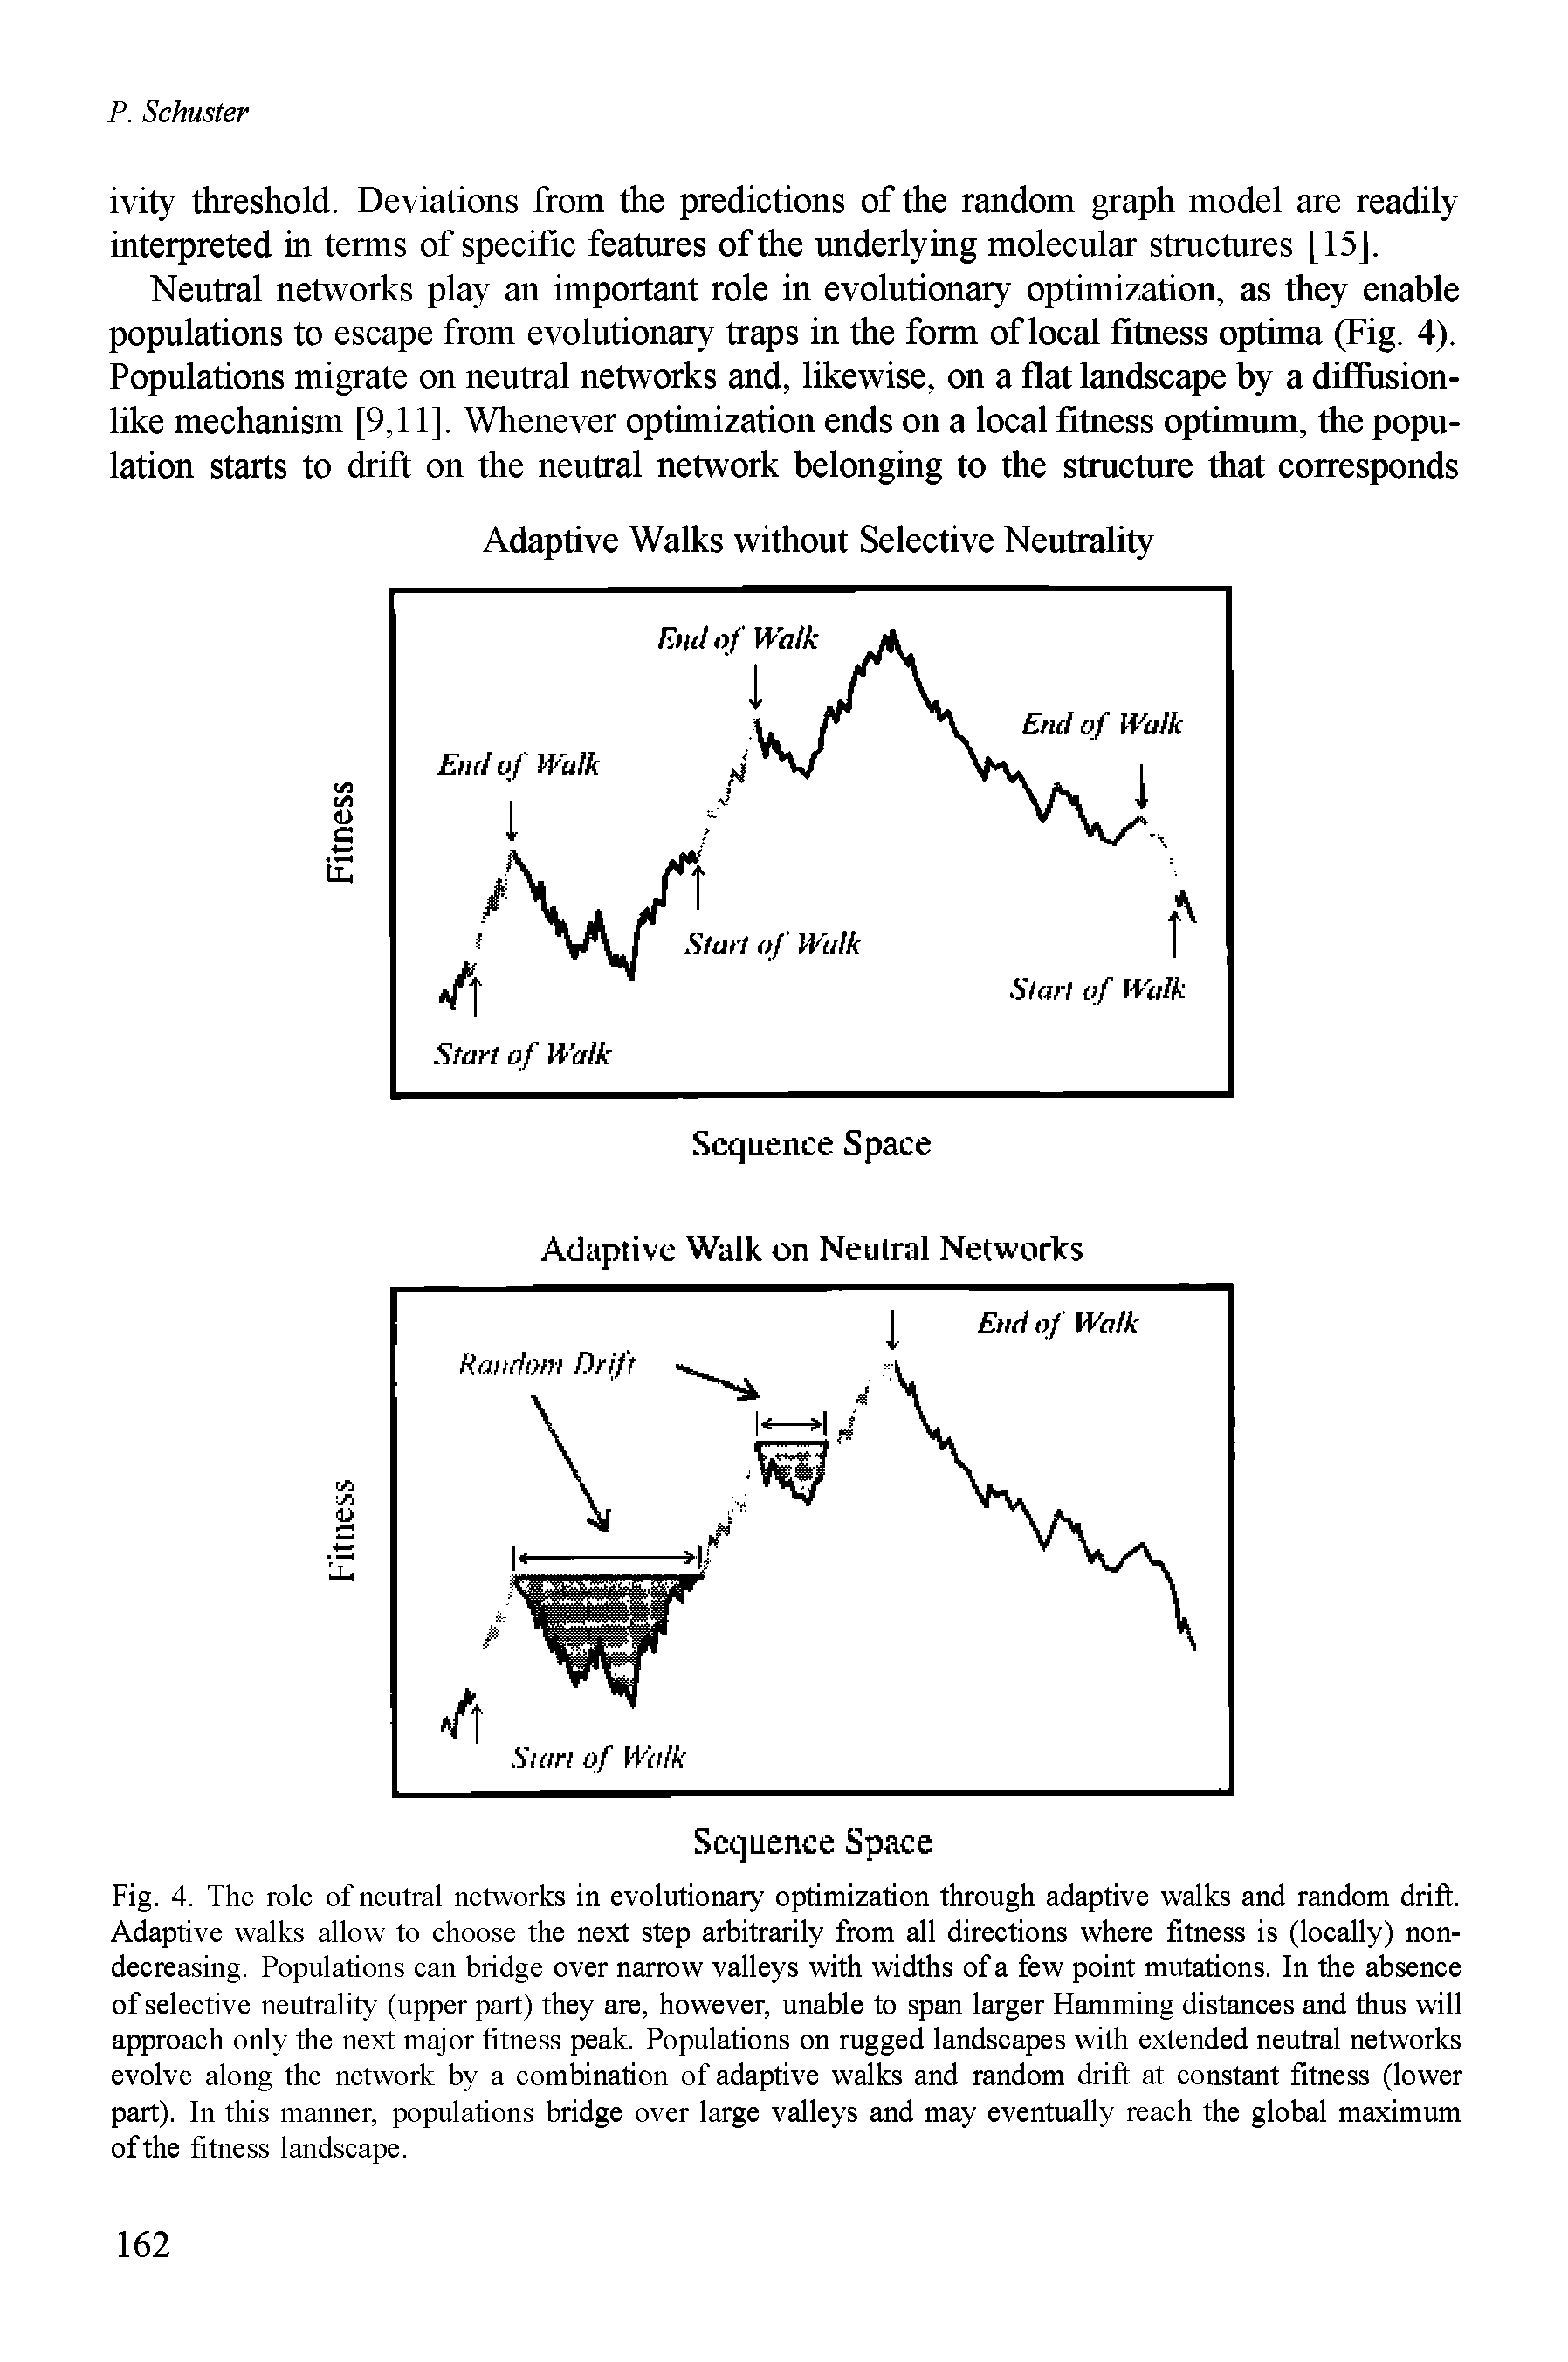 Fig. 4. The role of neutral networks in evolutionary optimization through adaptive walks and random drift. Adaptive walks allow to choose the next step arbitrarily from all directions where fitness is (locally) nondecreasing. Populations can bridge over narrow valleys with widths of a few point mutations. In the absence of selective neutrality (upper part) they are, however, unable to span larger Hamming distances and thus will approach only the next major fitness peak. Populations on rugged landscapes with extended neutral networks evolve along the network by a combination of adaptive walks and random drift at constant fitness (lower part). In this manner, populations bridge over large valleys and may eventually reach the global maximum ofthe fitness landscape.